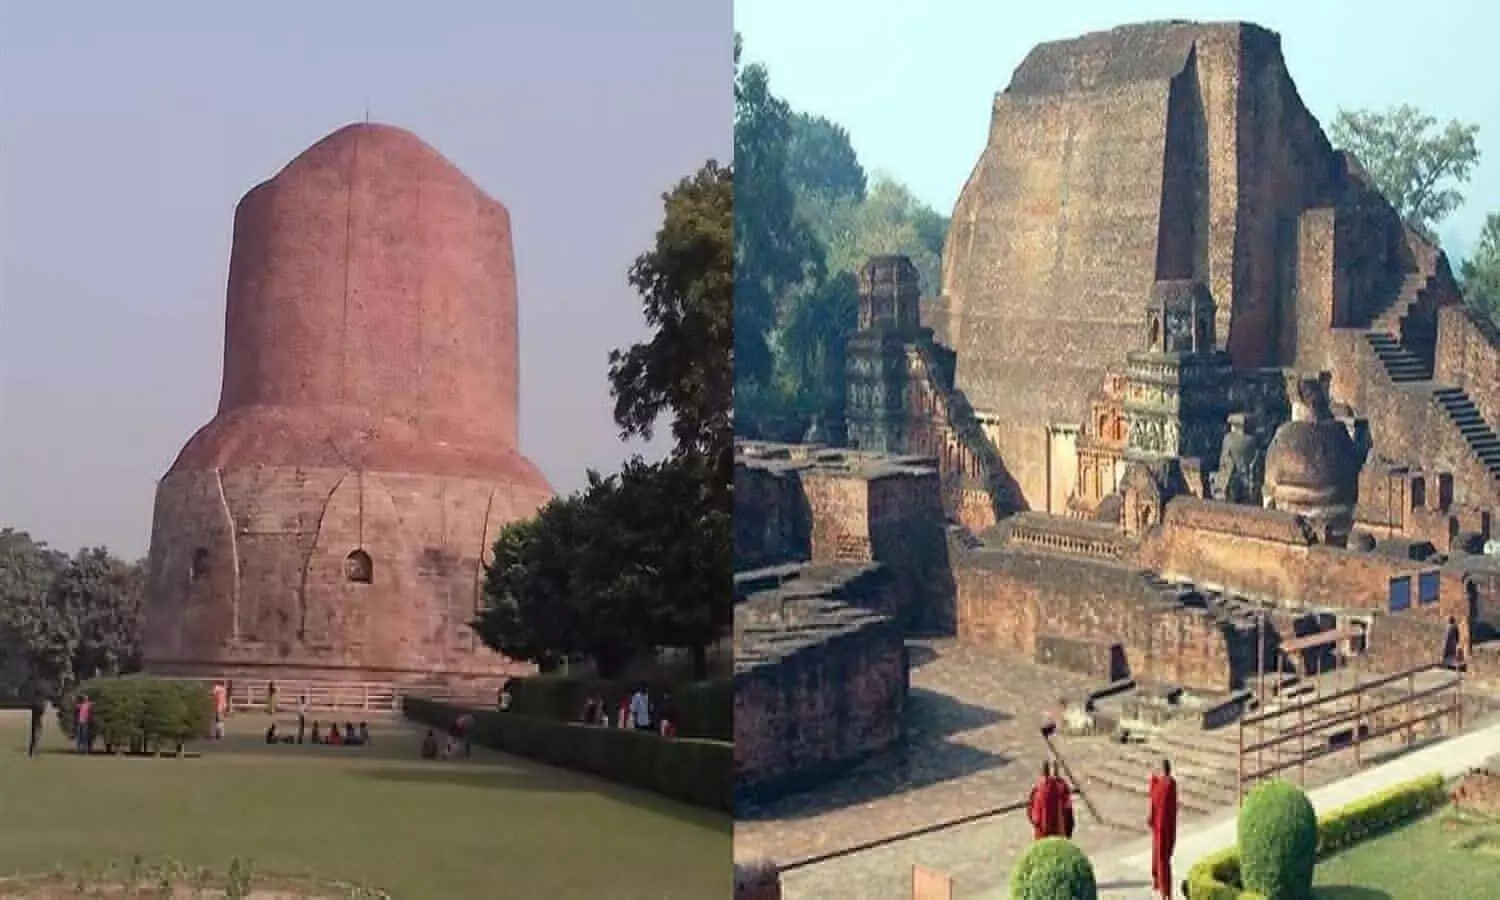 Sarnath will be included in the World Heritage List, UNESCO gave the green signal to the preliminary survey report